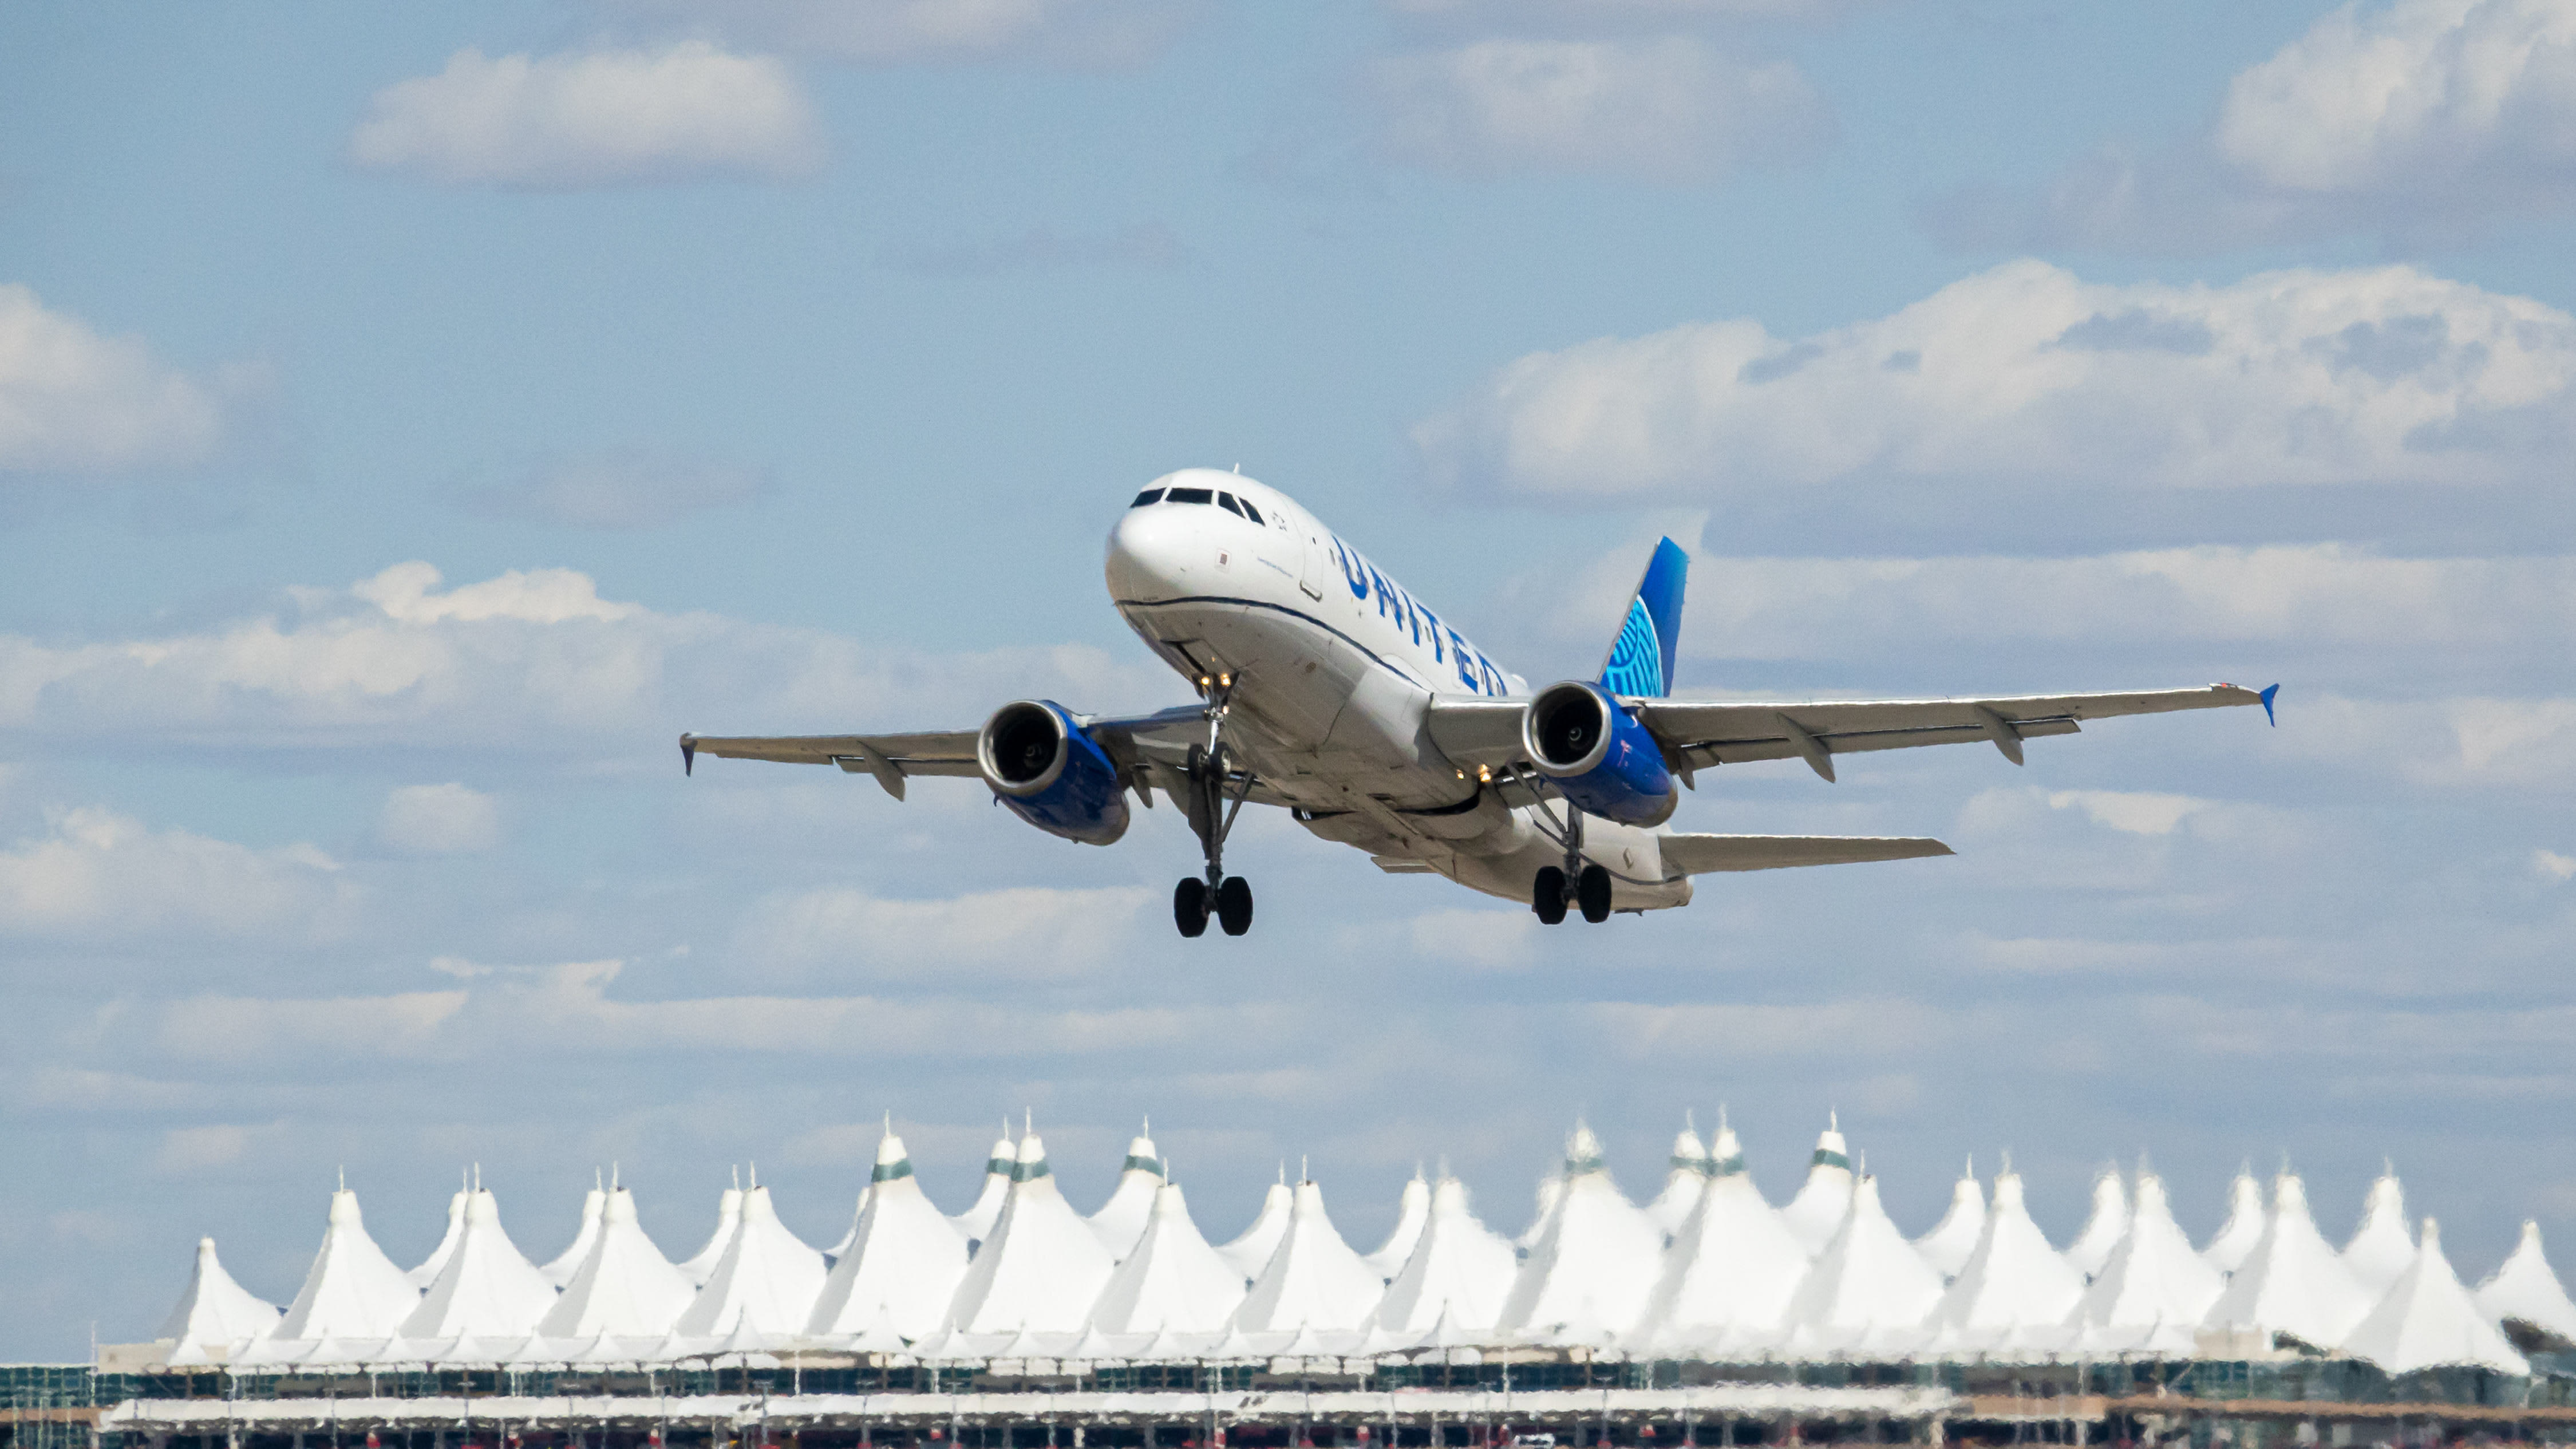 Why did United Airlines invest $1 billion in Denver Airport?